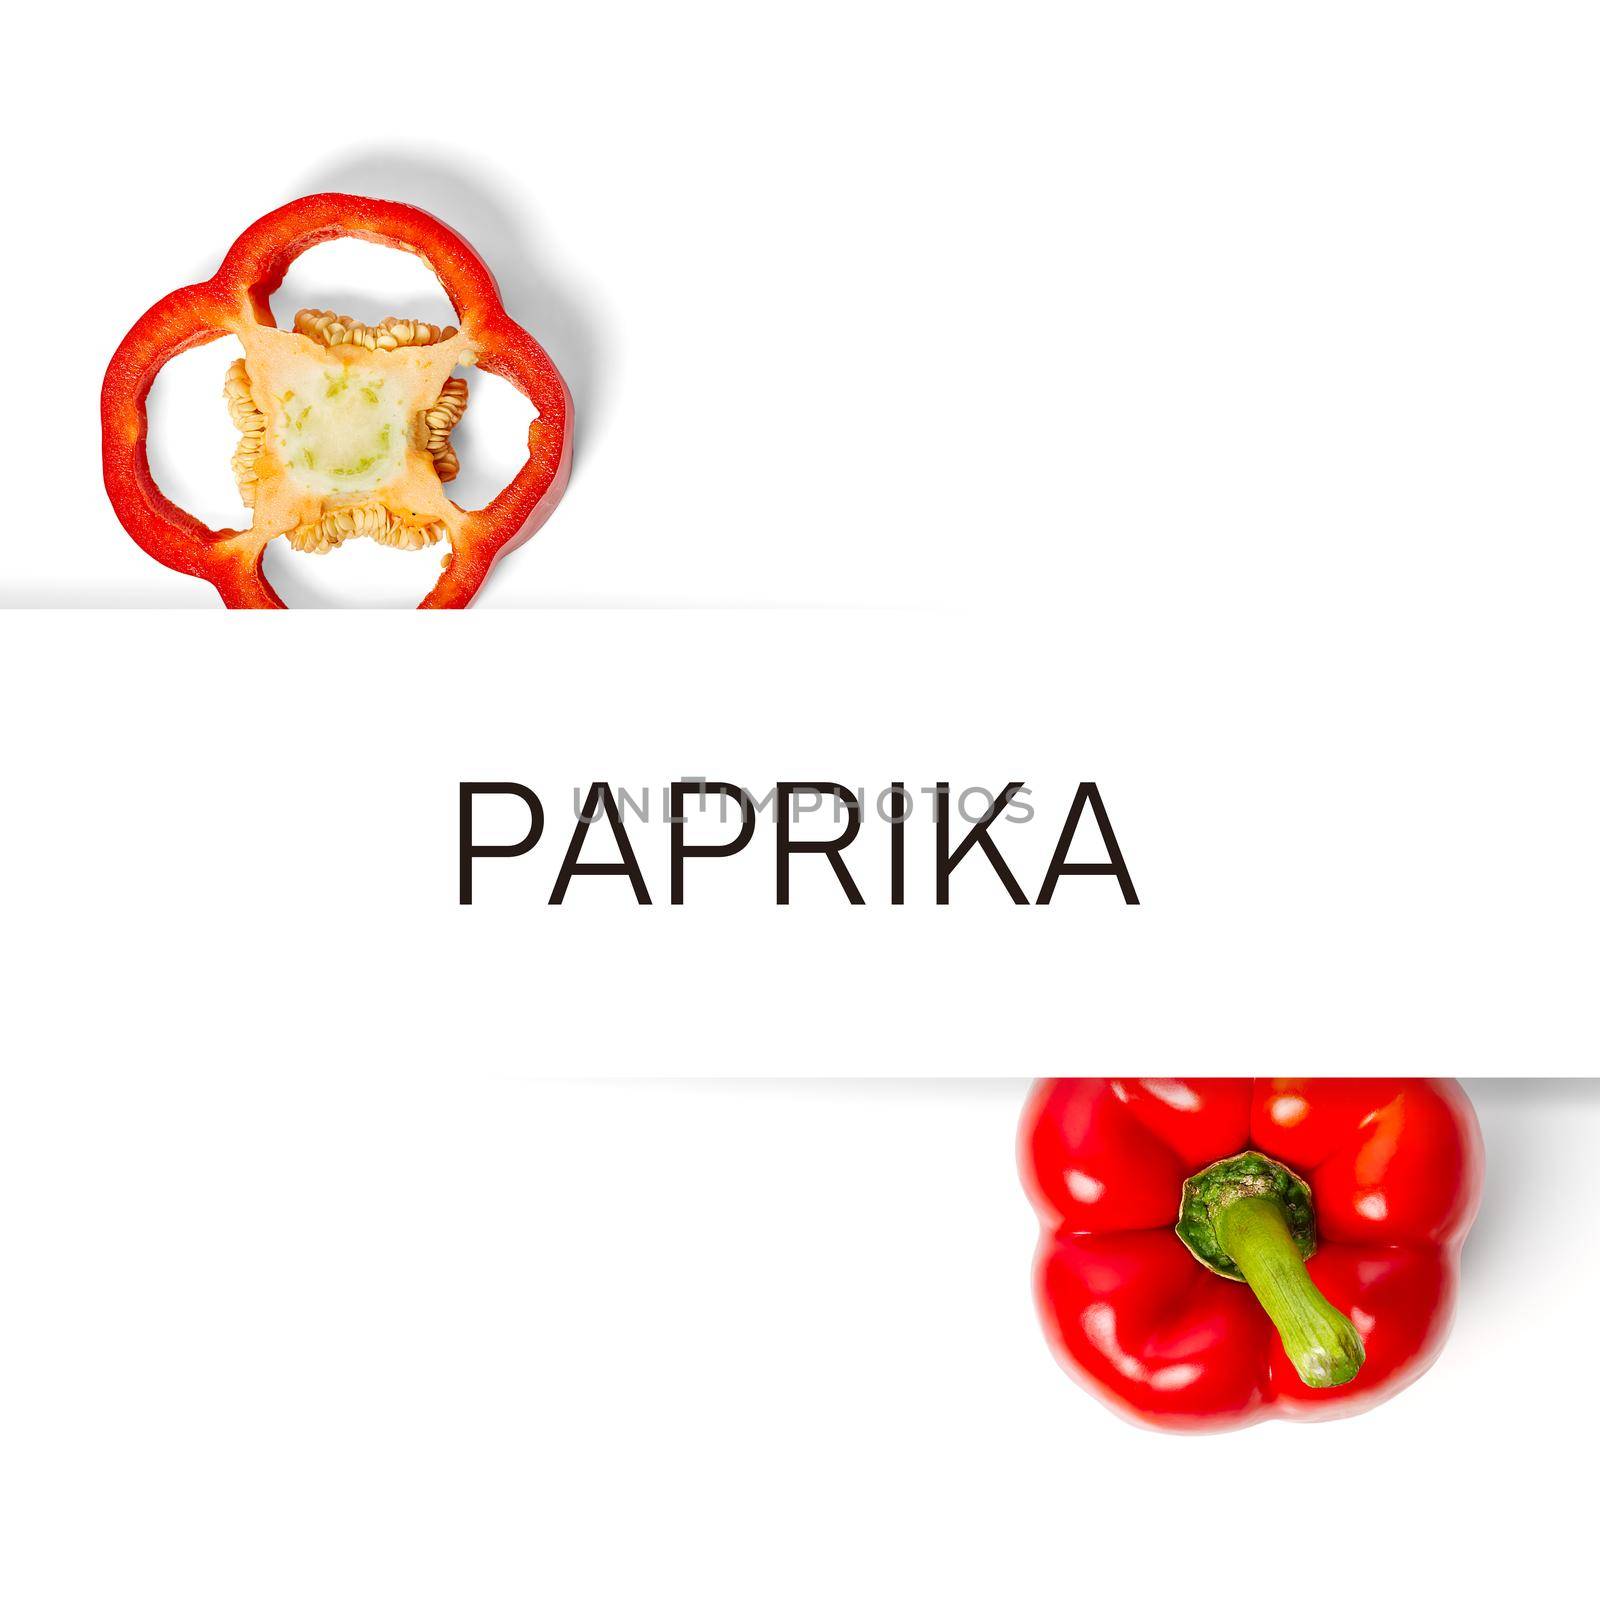 Paprika creative layout and composition isolated on white background Healthy eating, dieting concept by PhotoTime